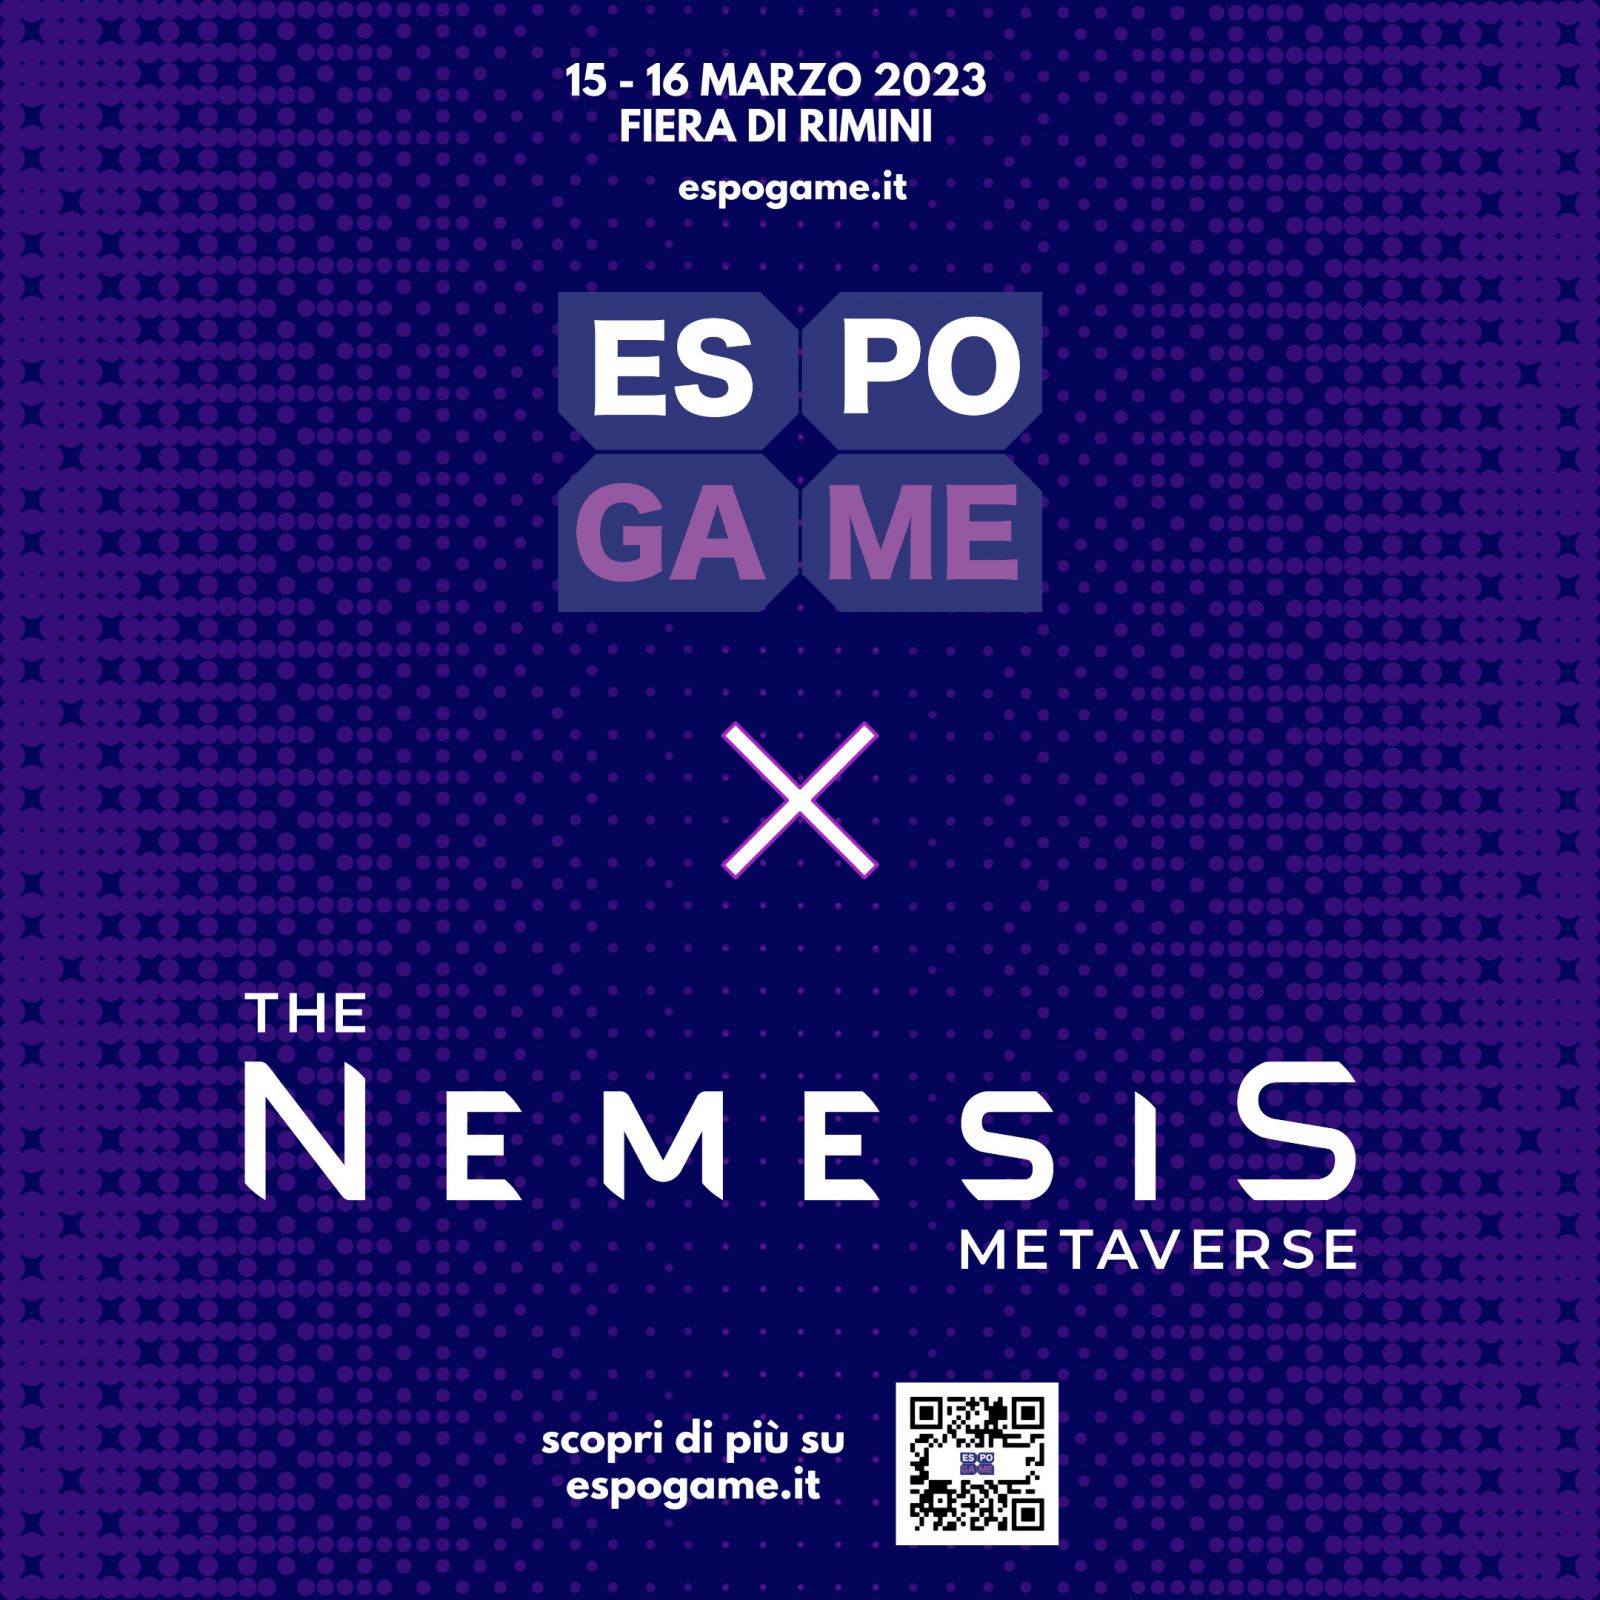 EspoGame: the first event in Italy with an Esports and gaming theme to be usable also in the metaverse